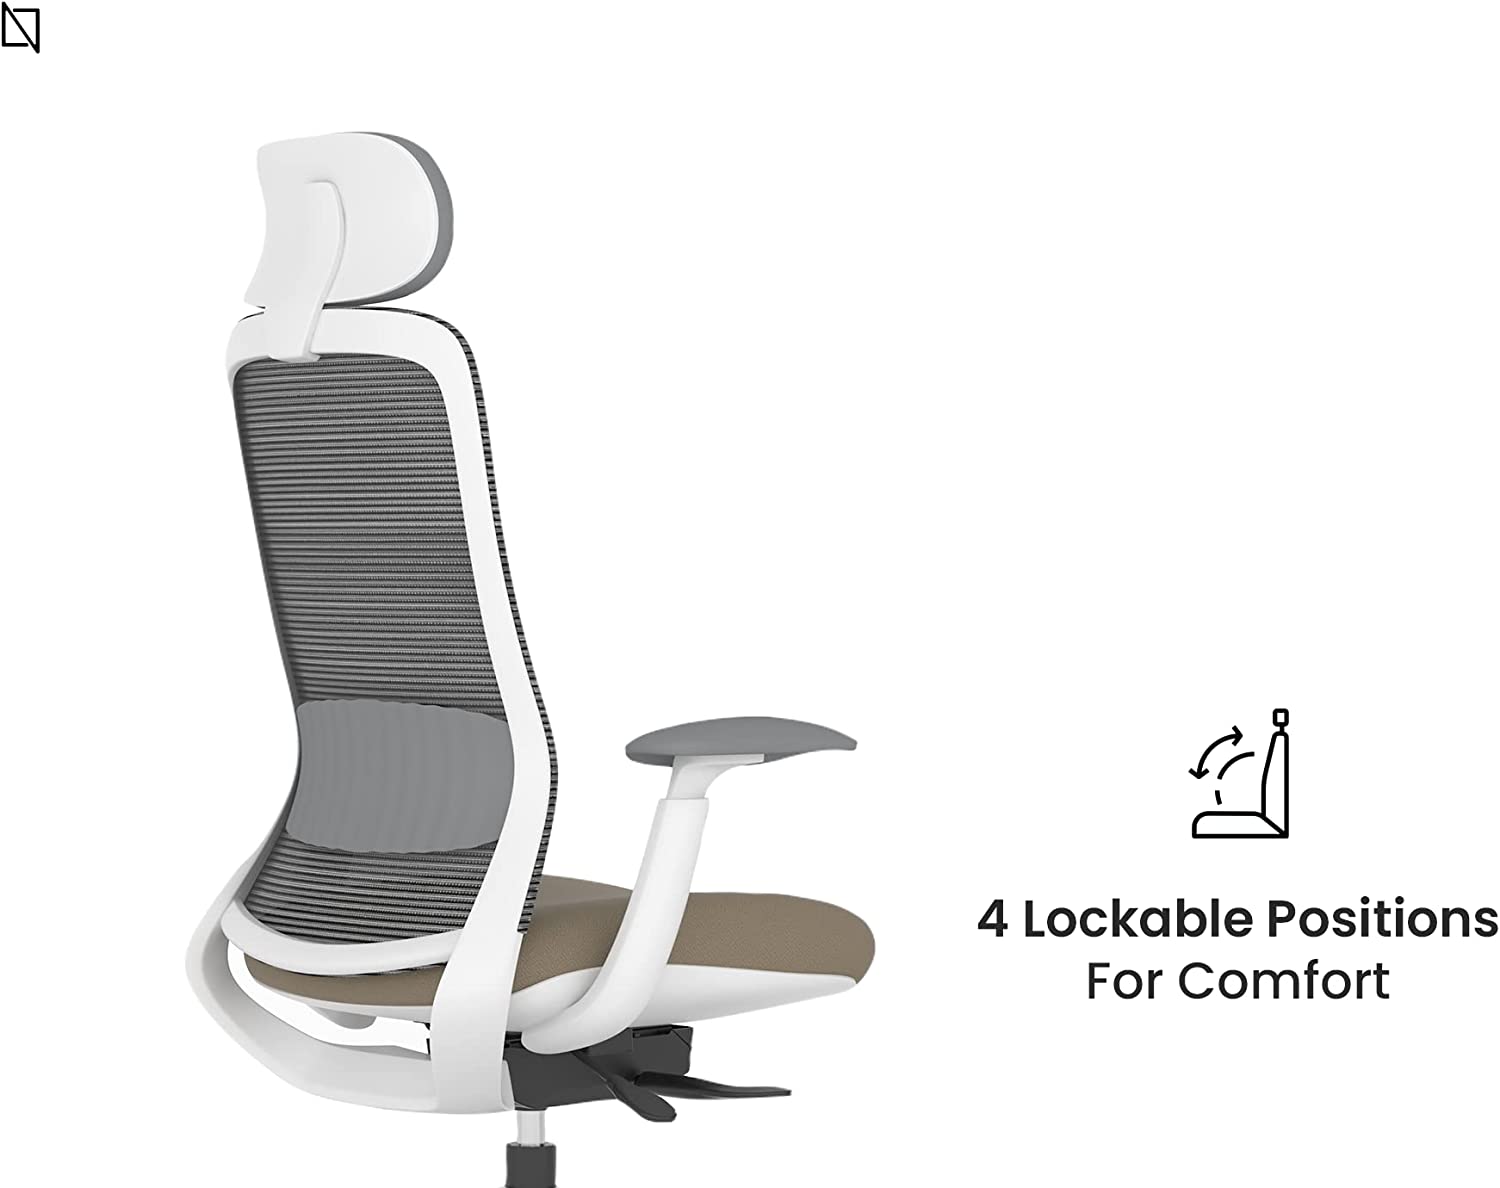 NIO Chair, Ergonomic Design, Premium Office & Computer Chair with adjustable features by Navodesk Dubai